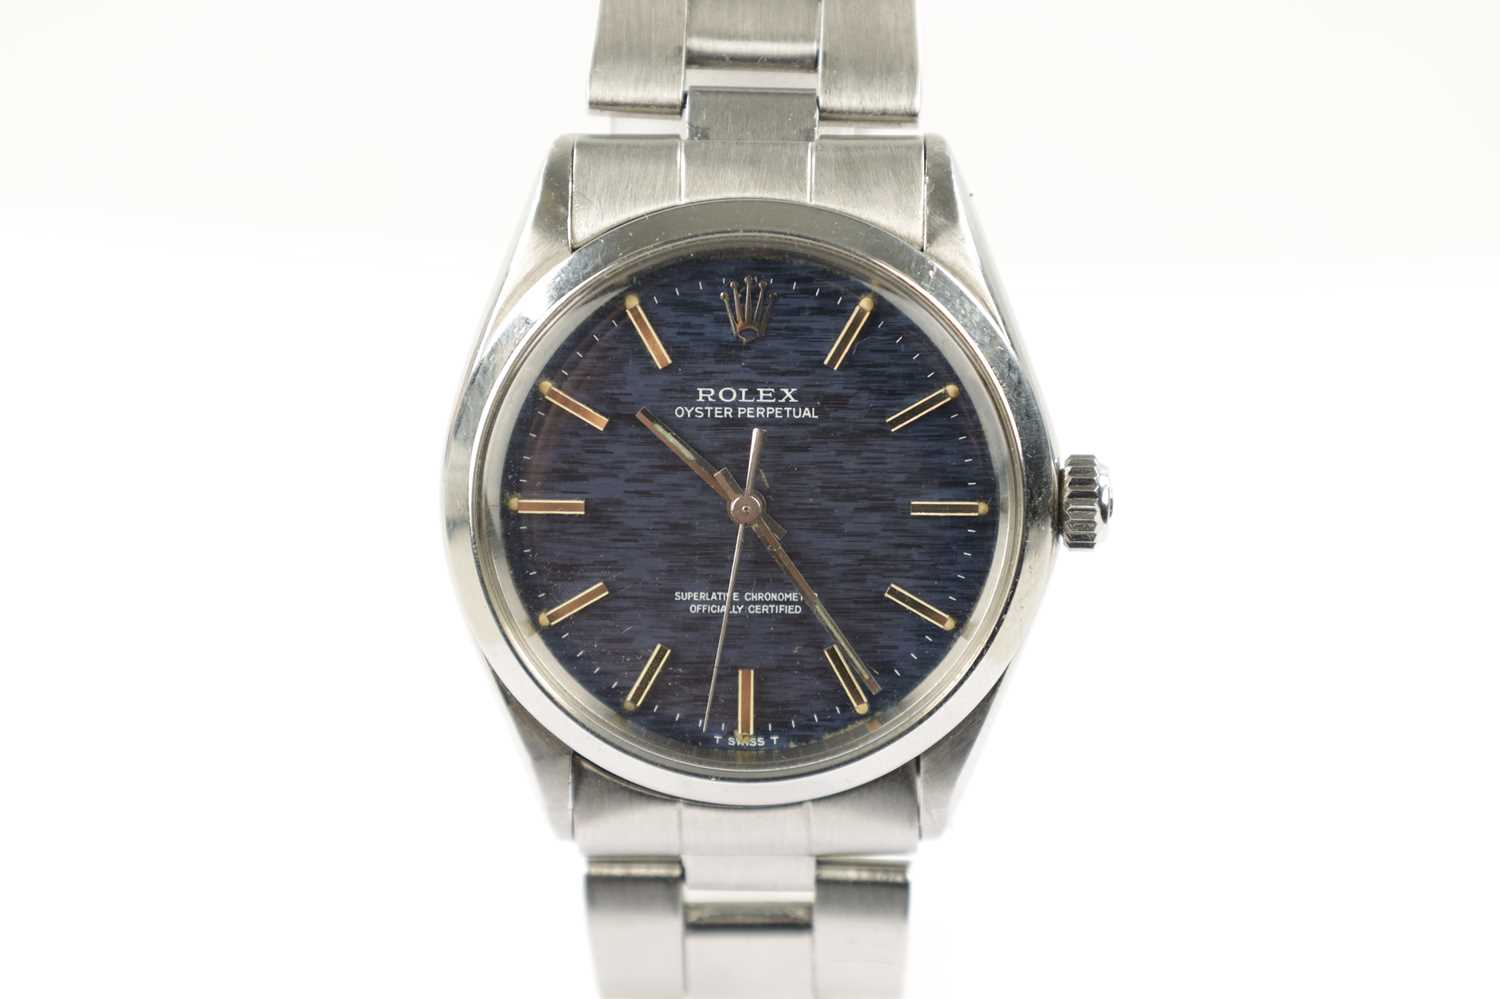 A GENTLEMAN’S 1970’S STEEL ROLEX OYSTER WRISTWATCH WITH RARE MOSAIC DIAL - Image 2 of 10